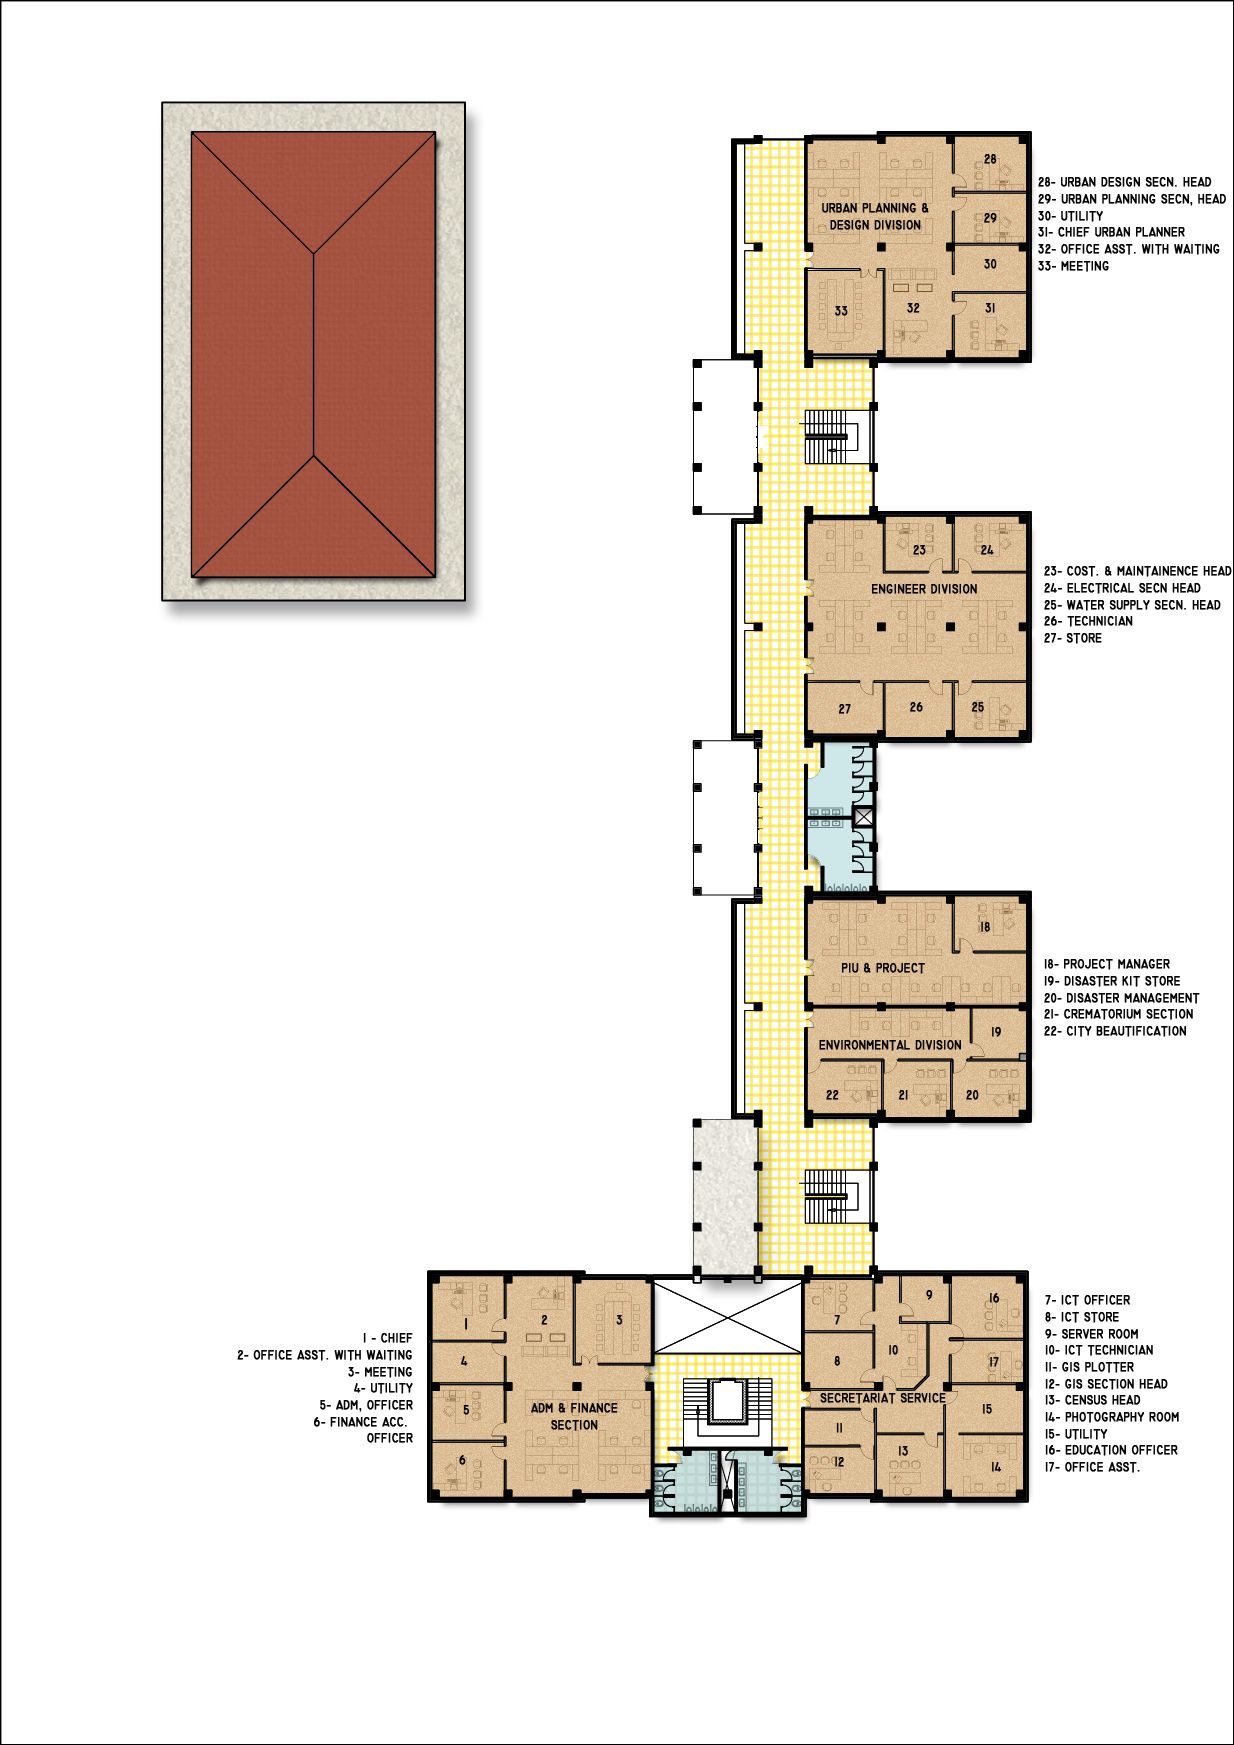 Typical Floor plan of Town Hall Floor plans, How to plan